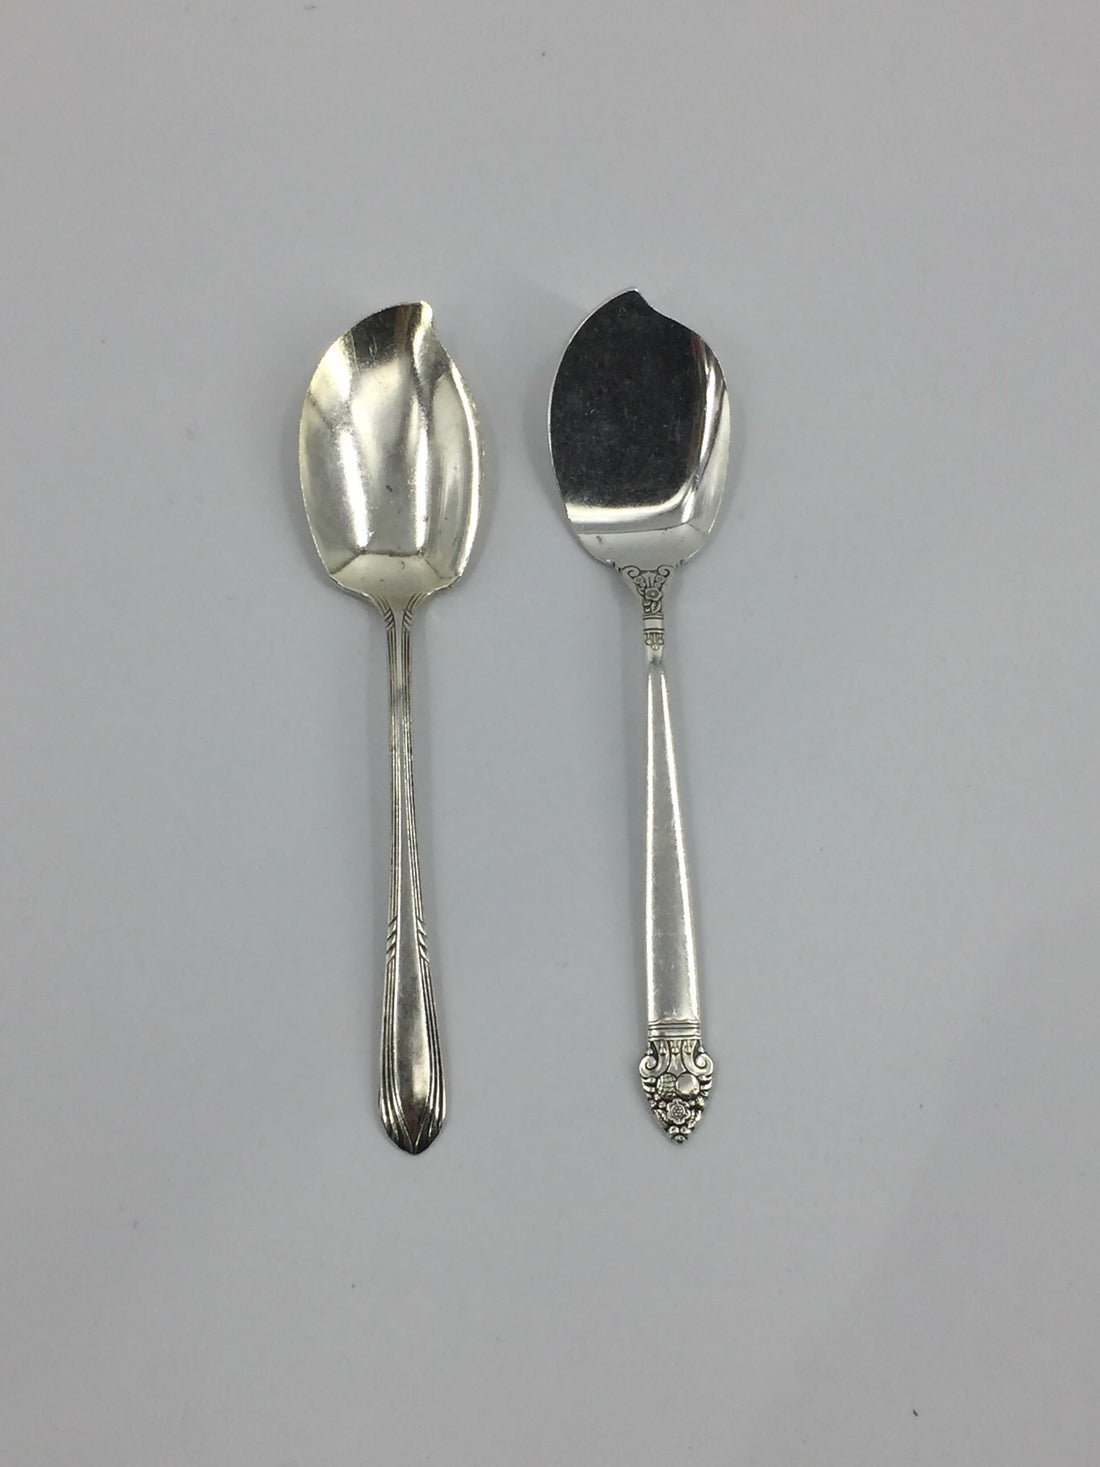 Two Hester &amp; Cook Jam Spreader Silver open stock on a white surface.